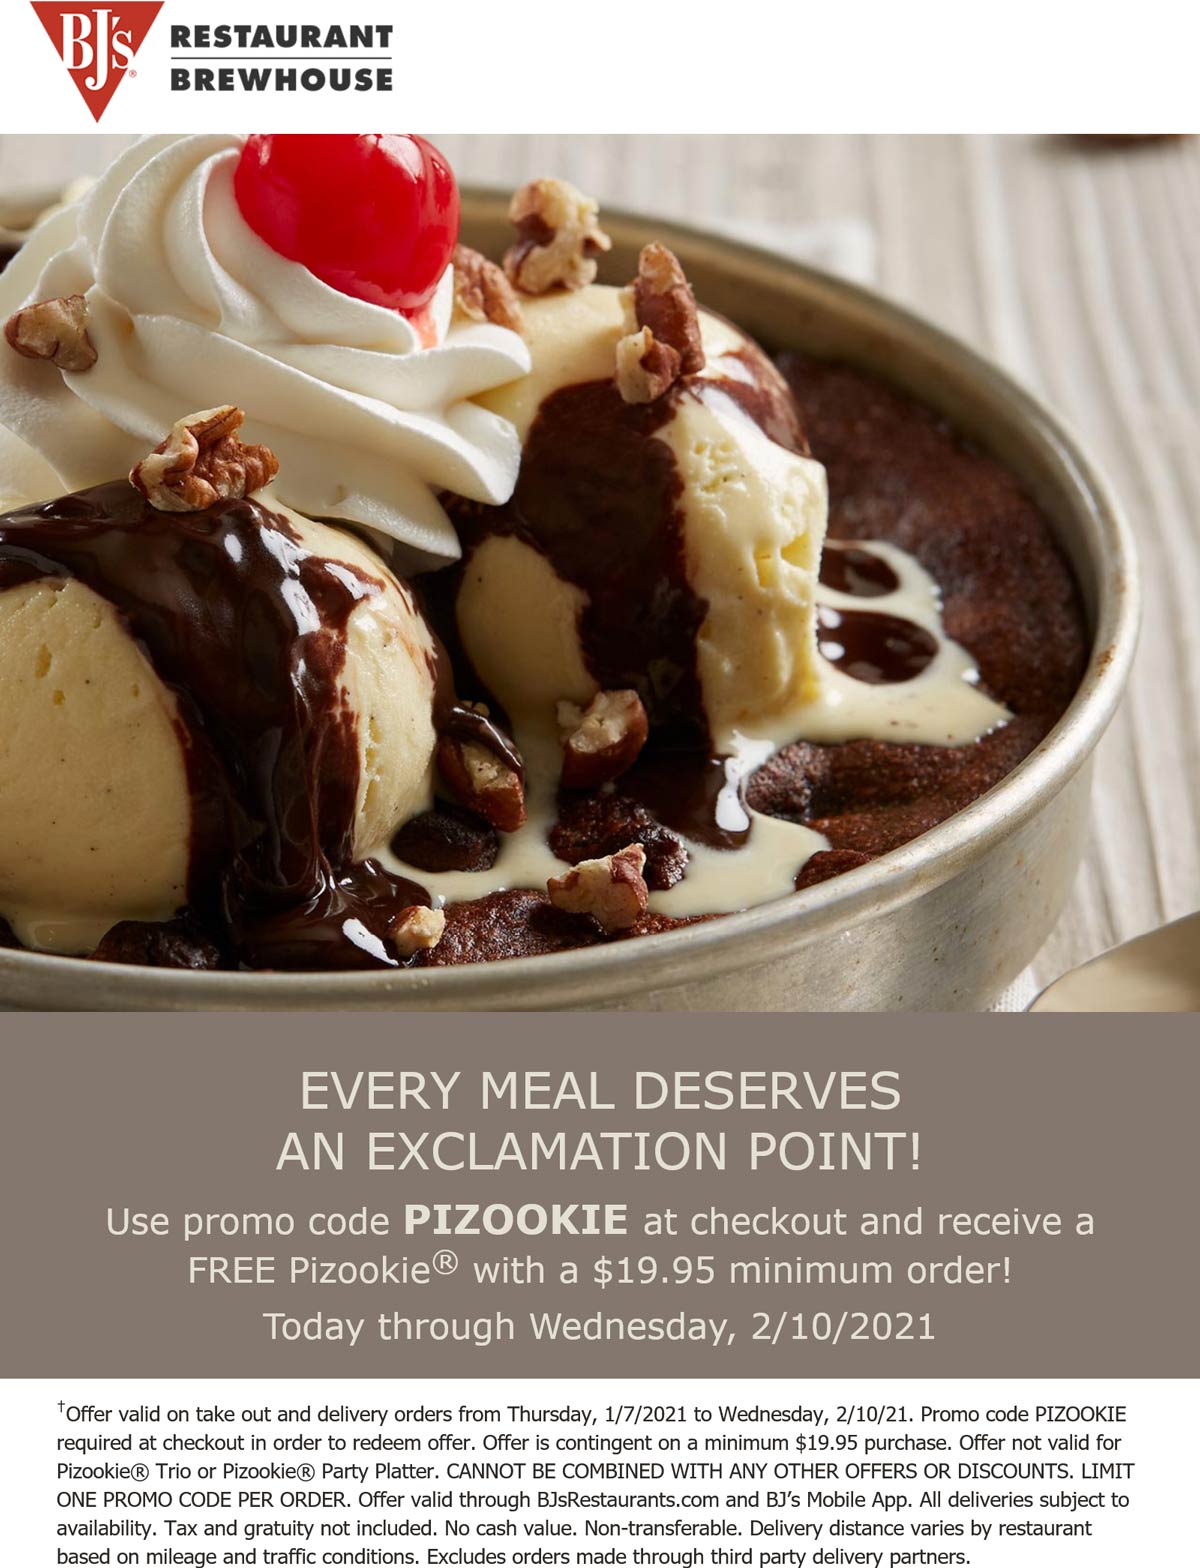 BJs Restaurant restaurants Coupon  Free Pizookie with $20 spent on take out & delivery at BJs Restaurant Brewhouse via promo code PIZOOKIE #bjsrestaurant 